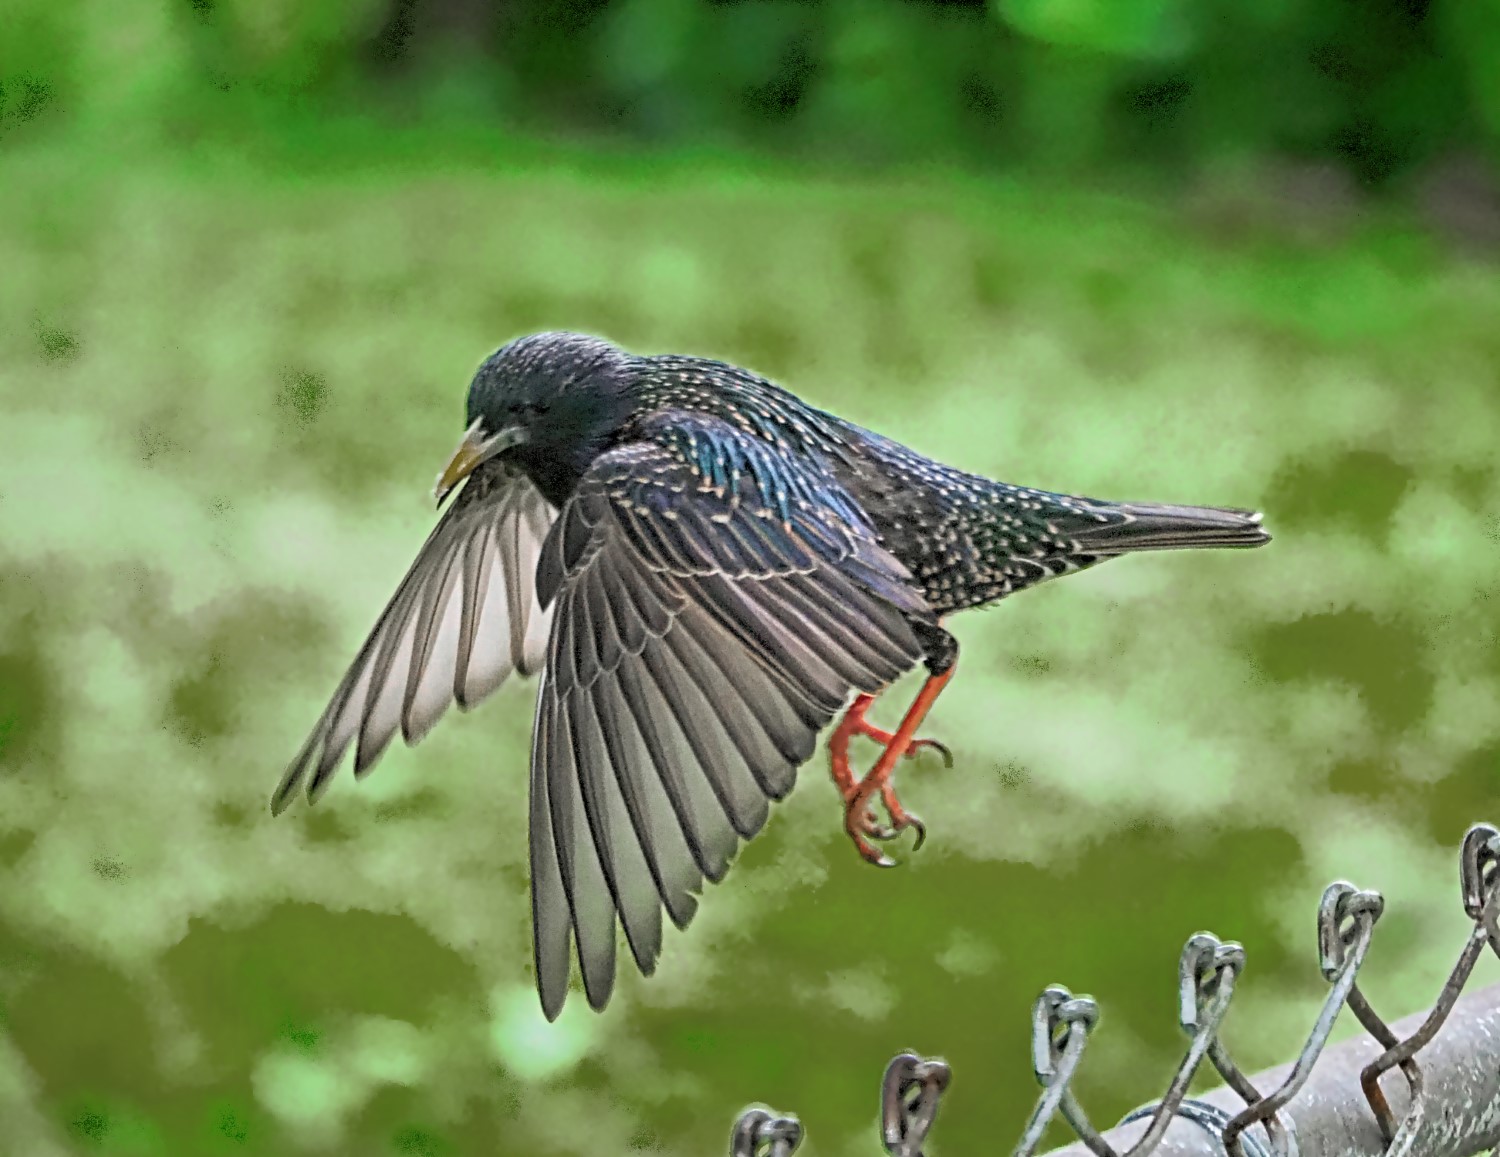 A European Starling takes flight. Wings spread, showing the tapered tips that give the bird its name. Brown bird with white mottling and a long, tapered beak.